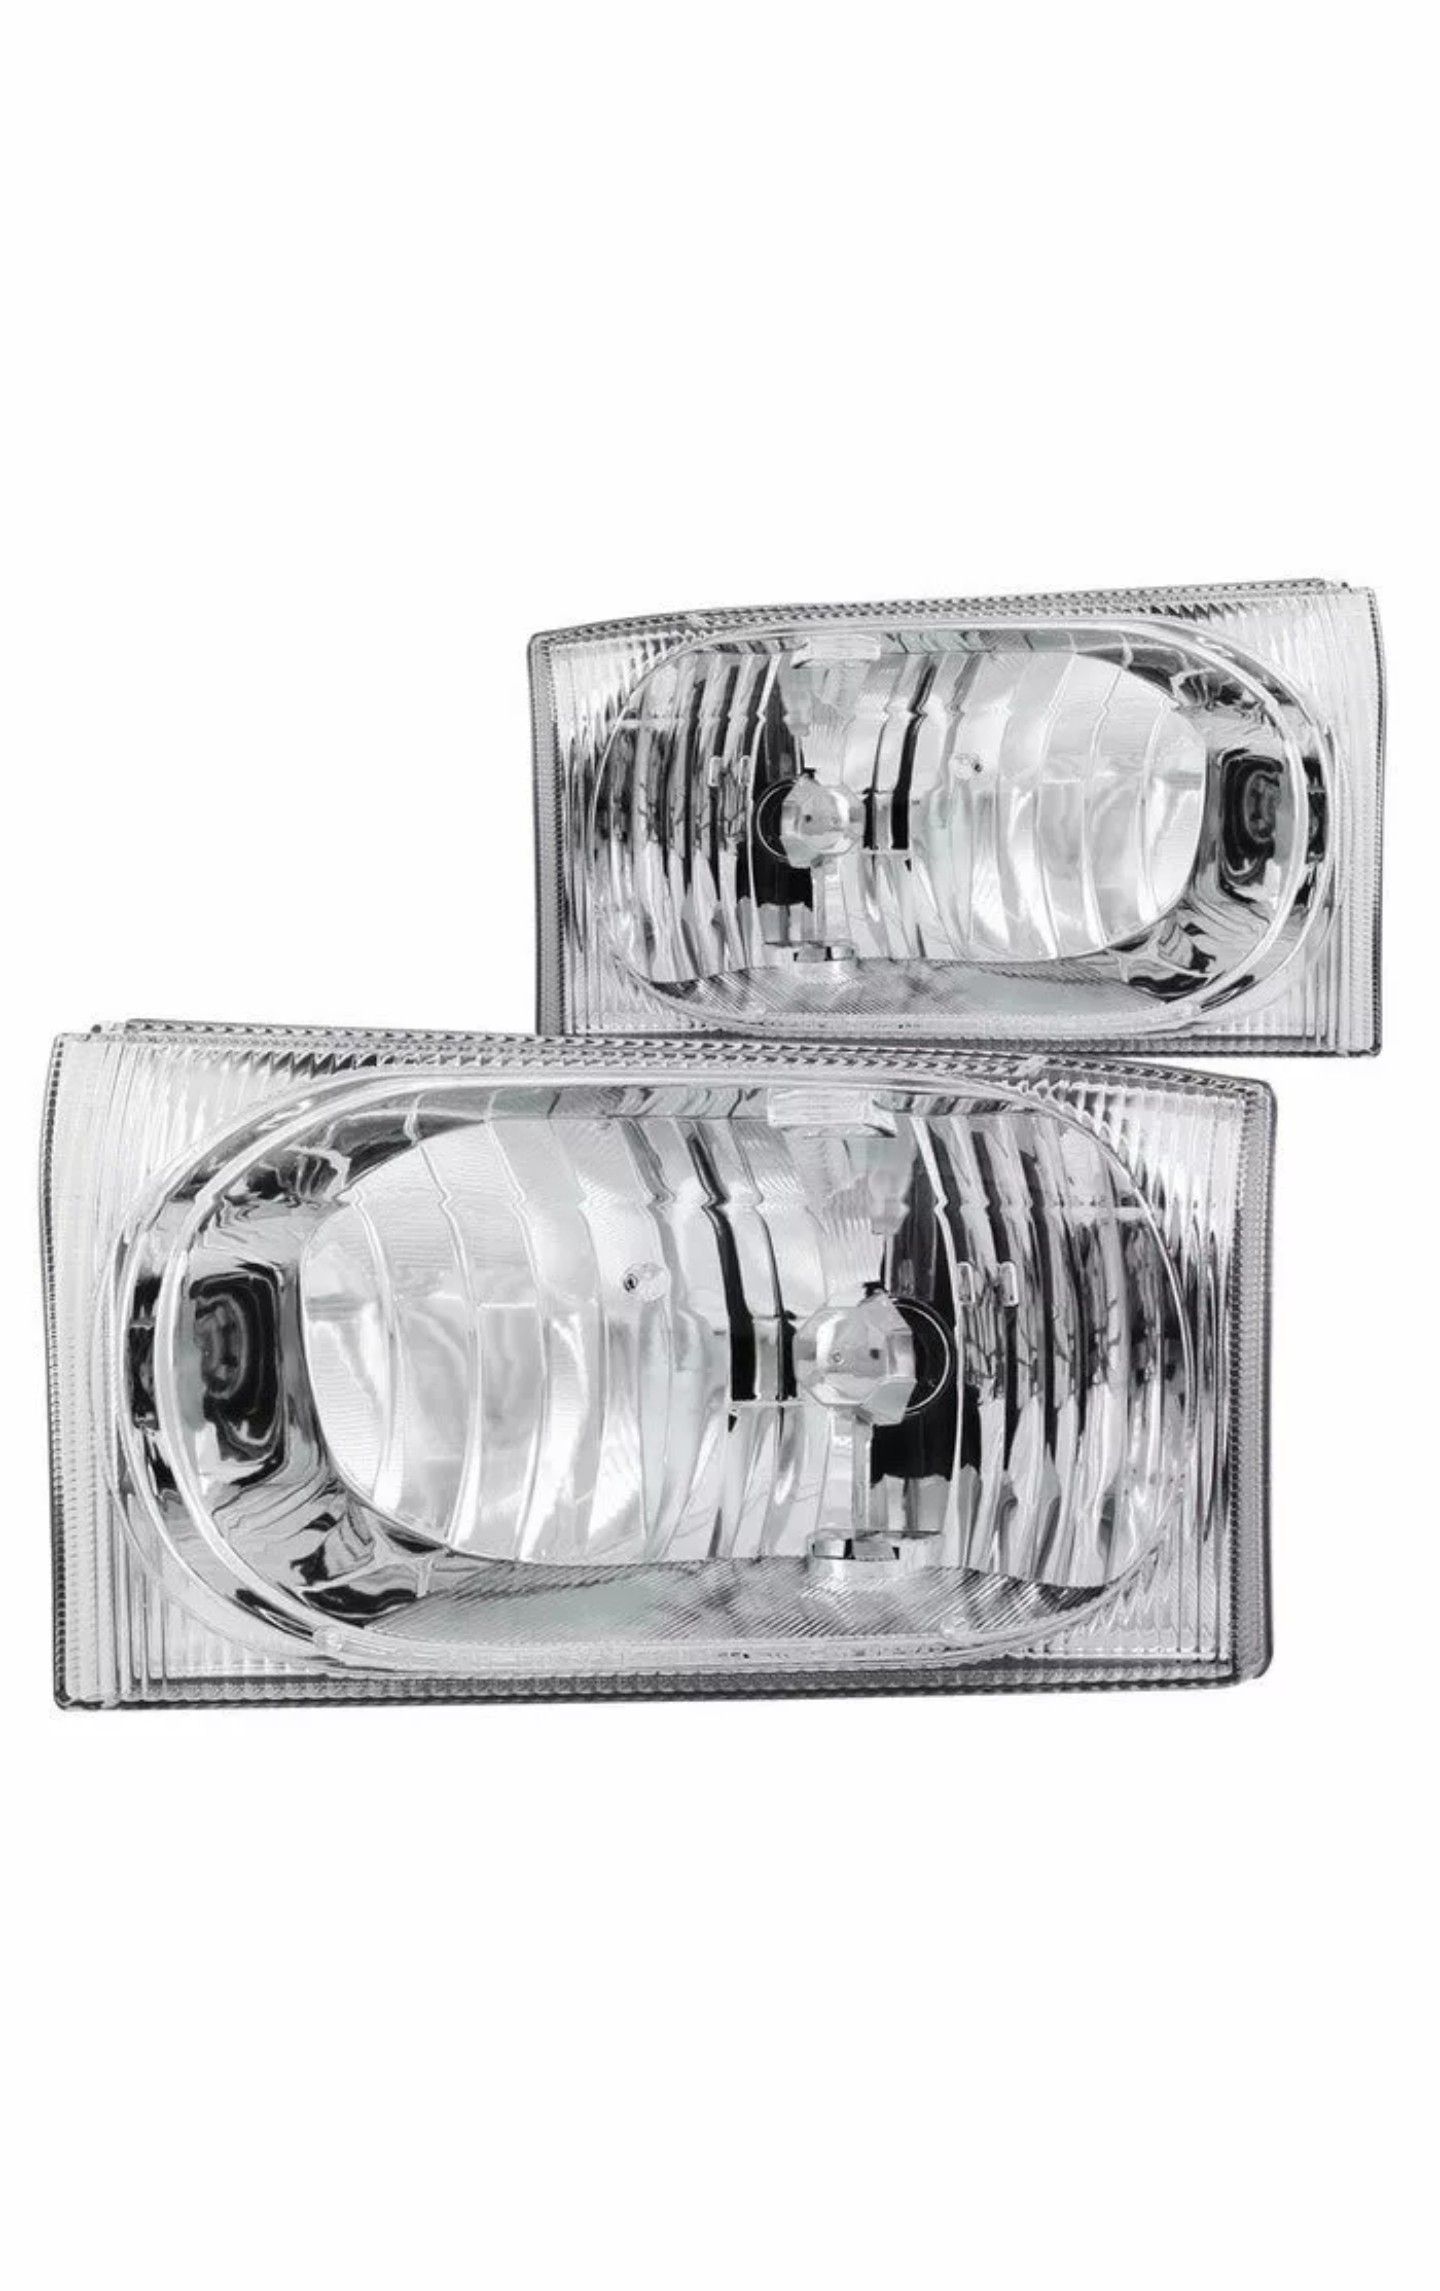 Crystal Headlights Chrome for Ford Excursion/F-250/F-(contact info removed)-2004